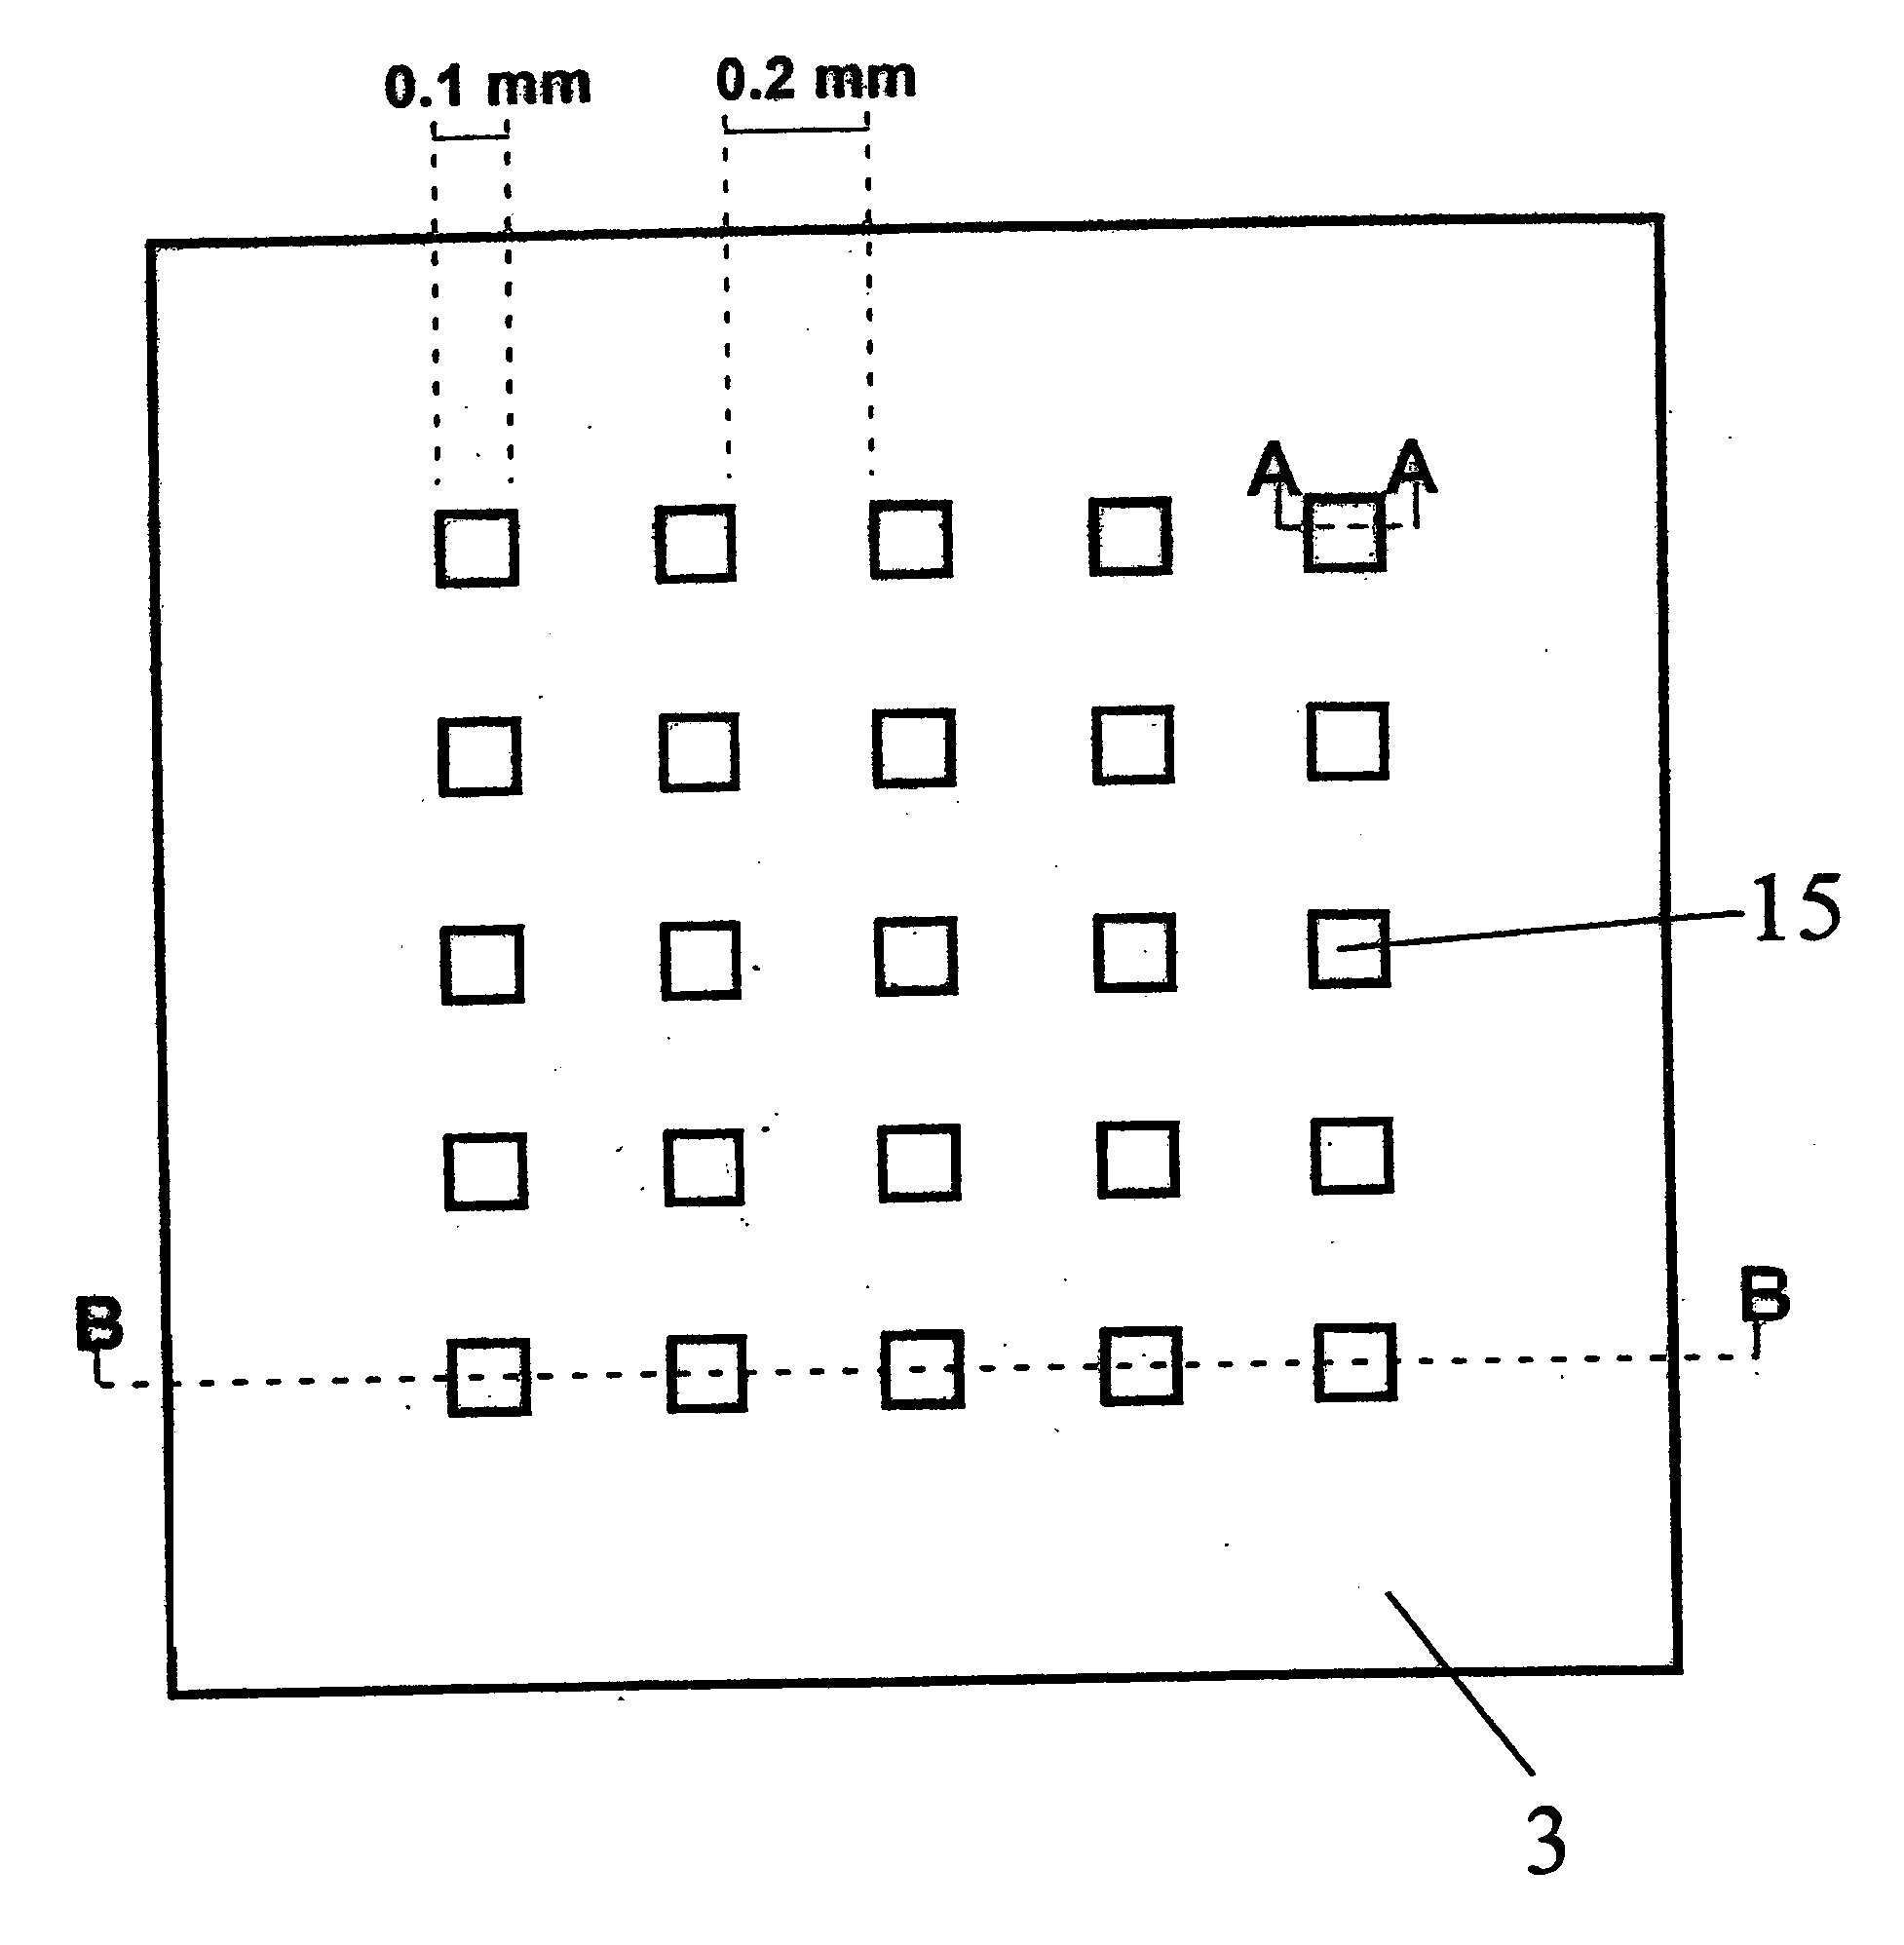 Array devices and methods of use thereof